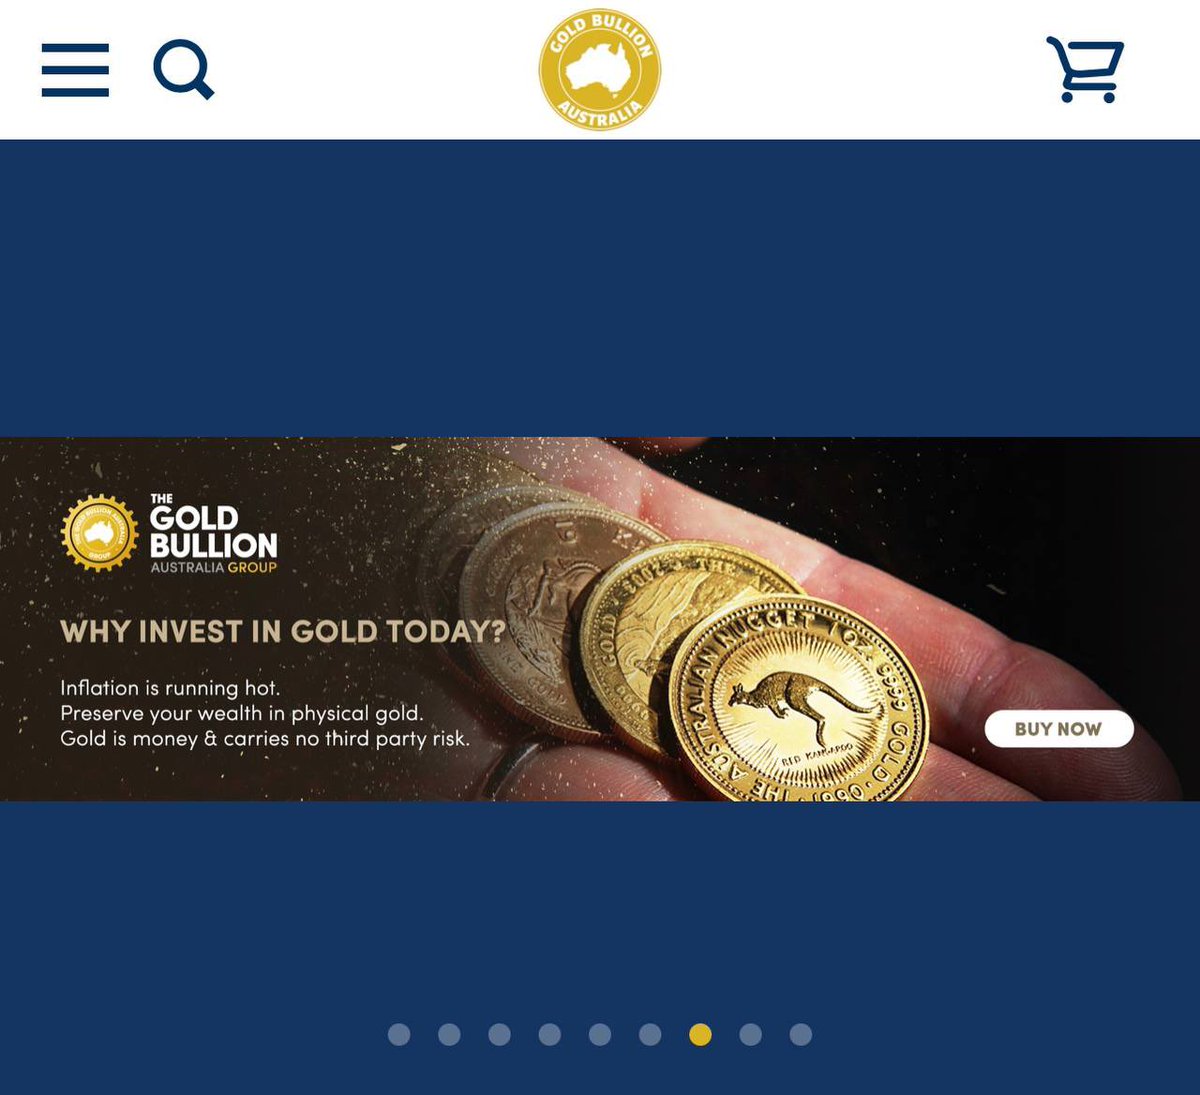 Another bank in Australia (Macquarie) just announced it is going cashless in a month. 

Now, more than ever, it is crucial to consider gold and silver.

My provider of choice for Australia is Gold Bullion Australia Group. I use them personally. 

Visit: goldbullionaustralia.com.au/?utm_source_ze…